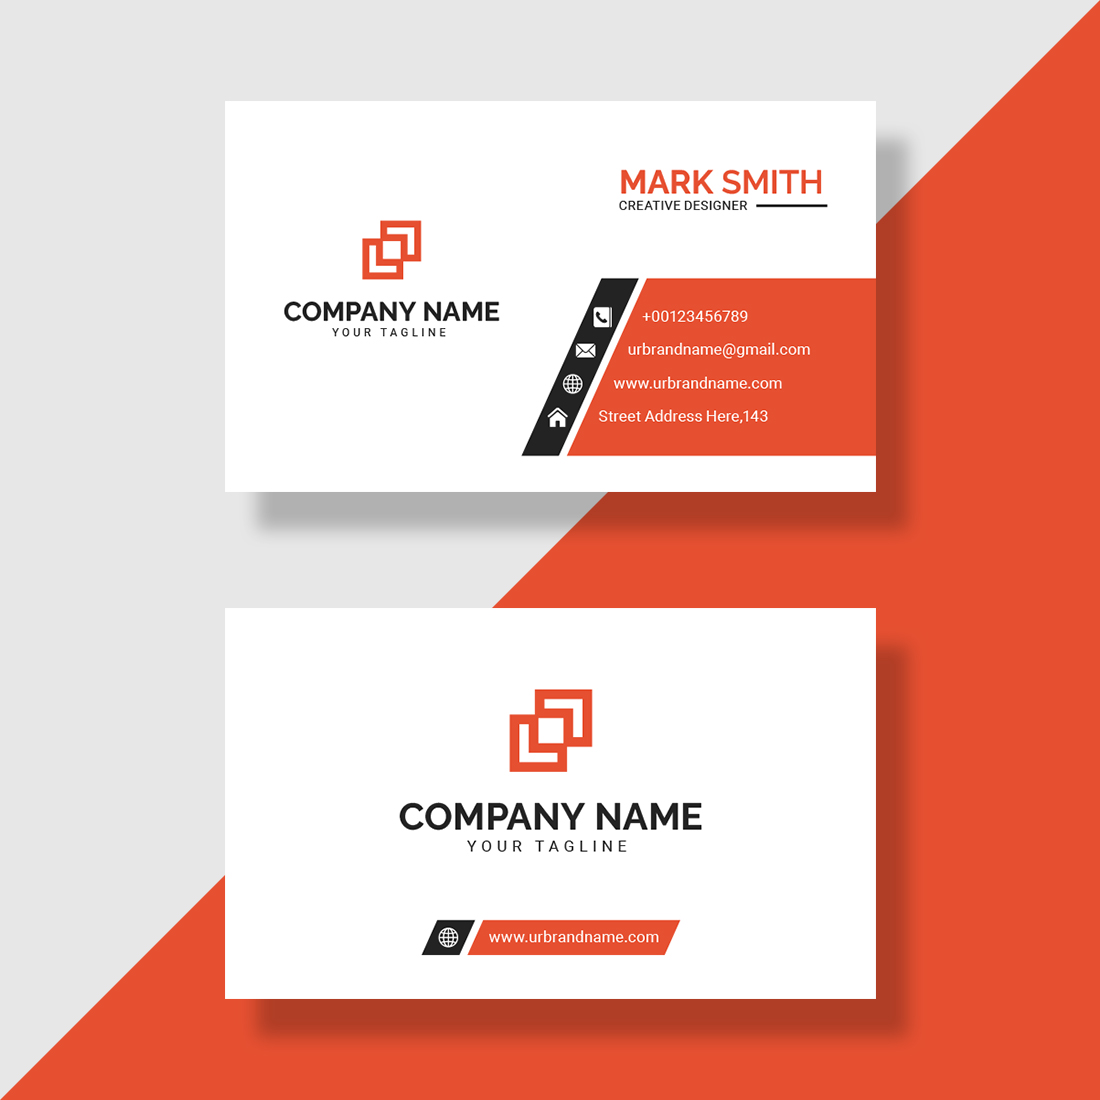 corporate simple and professional business card design 2